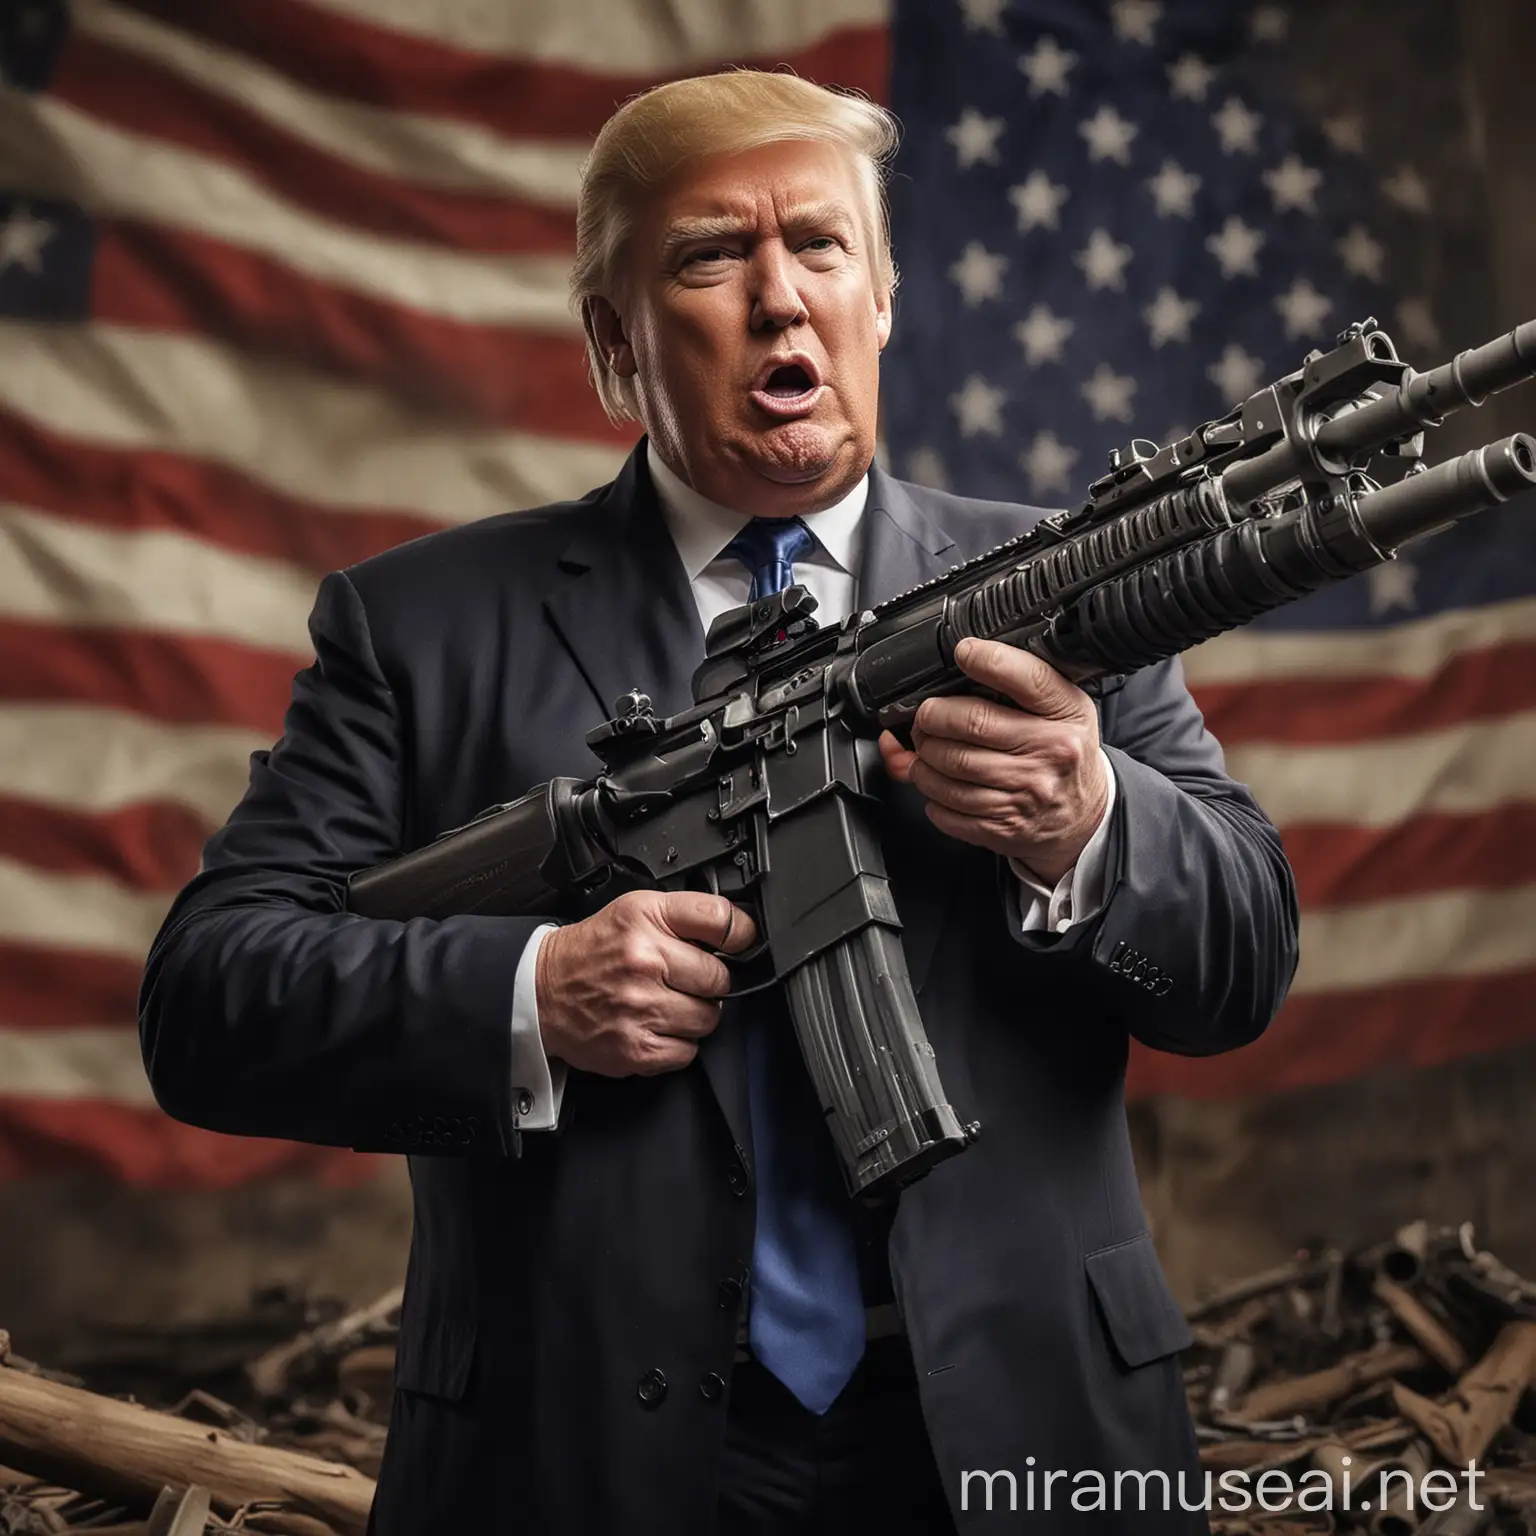 Donald Trump Firing Heavy Rifle with American Flag Background